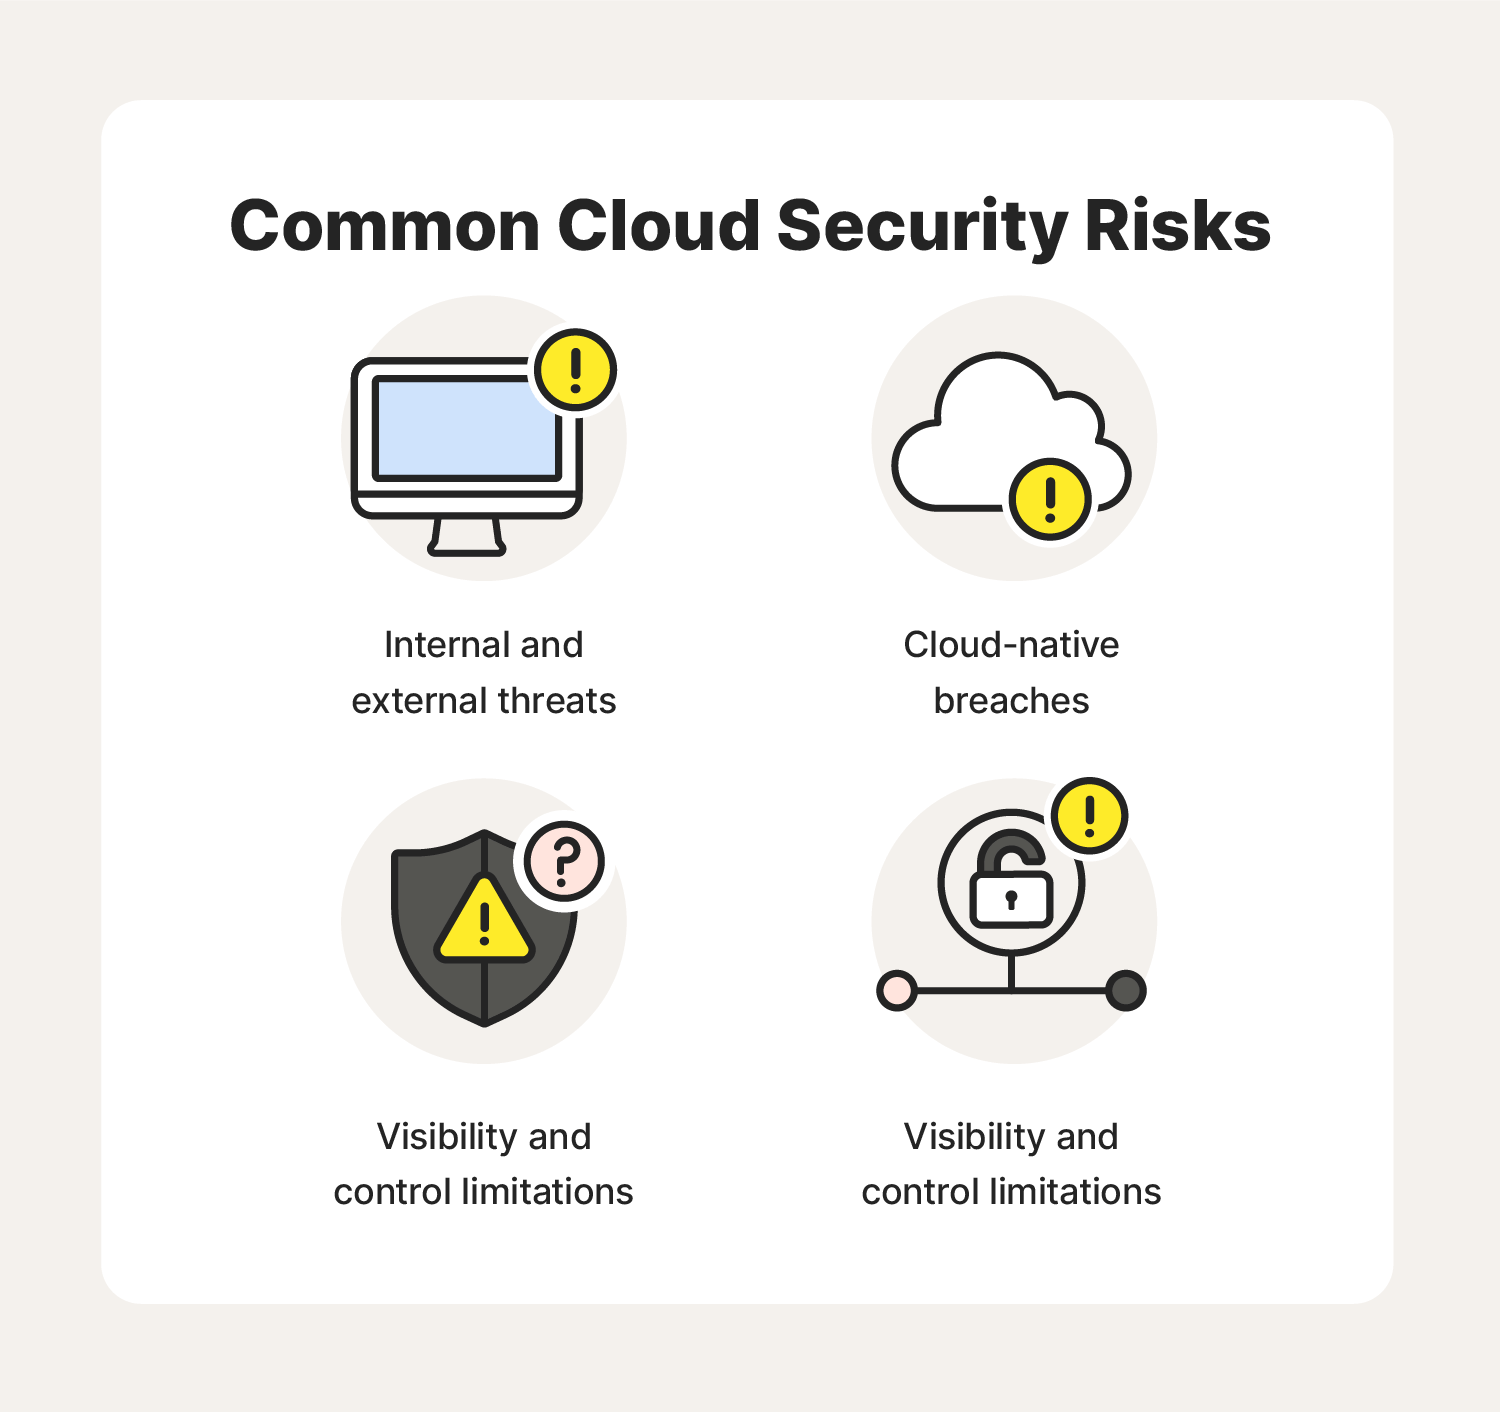 A graphic discussing common cloud security risks.